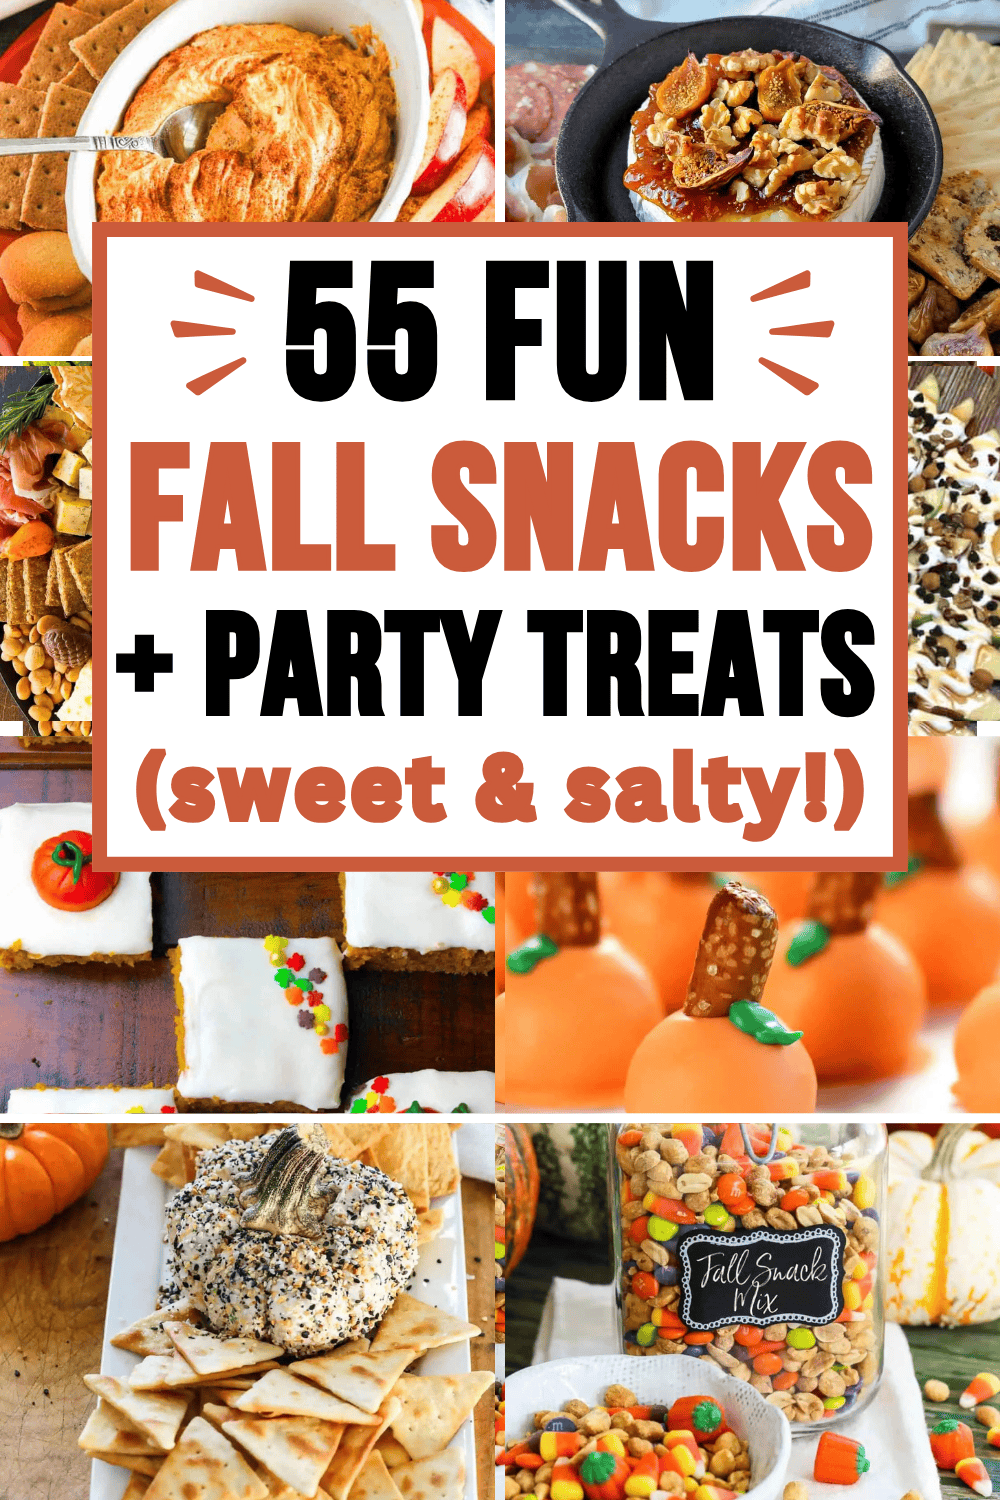 Quick and easy fall snacks and autumn sweet treats! The best fall sweet and salty snacks for a crowd, movie night, after school, Halloween or Thanksgiving potlucks, or football game day. Easy fall snacks for party, cute autumn snacks fall treats, fall bonfire snacks, fall snacks aesthetic, fall charcuterie board, no bake treats, fall snack mix recipes, fall party snacks appetizers, fall themed snacks, finger foods, appetizers and dips, october treats, fall birthday party ideas, harvest treats.